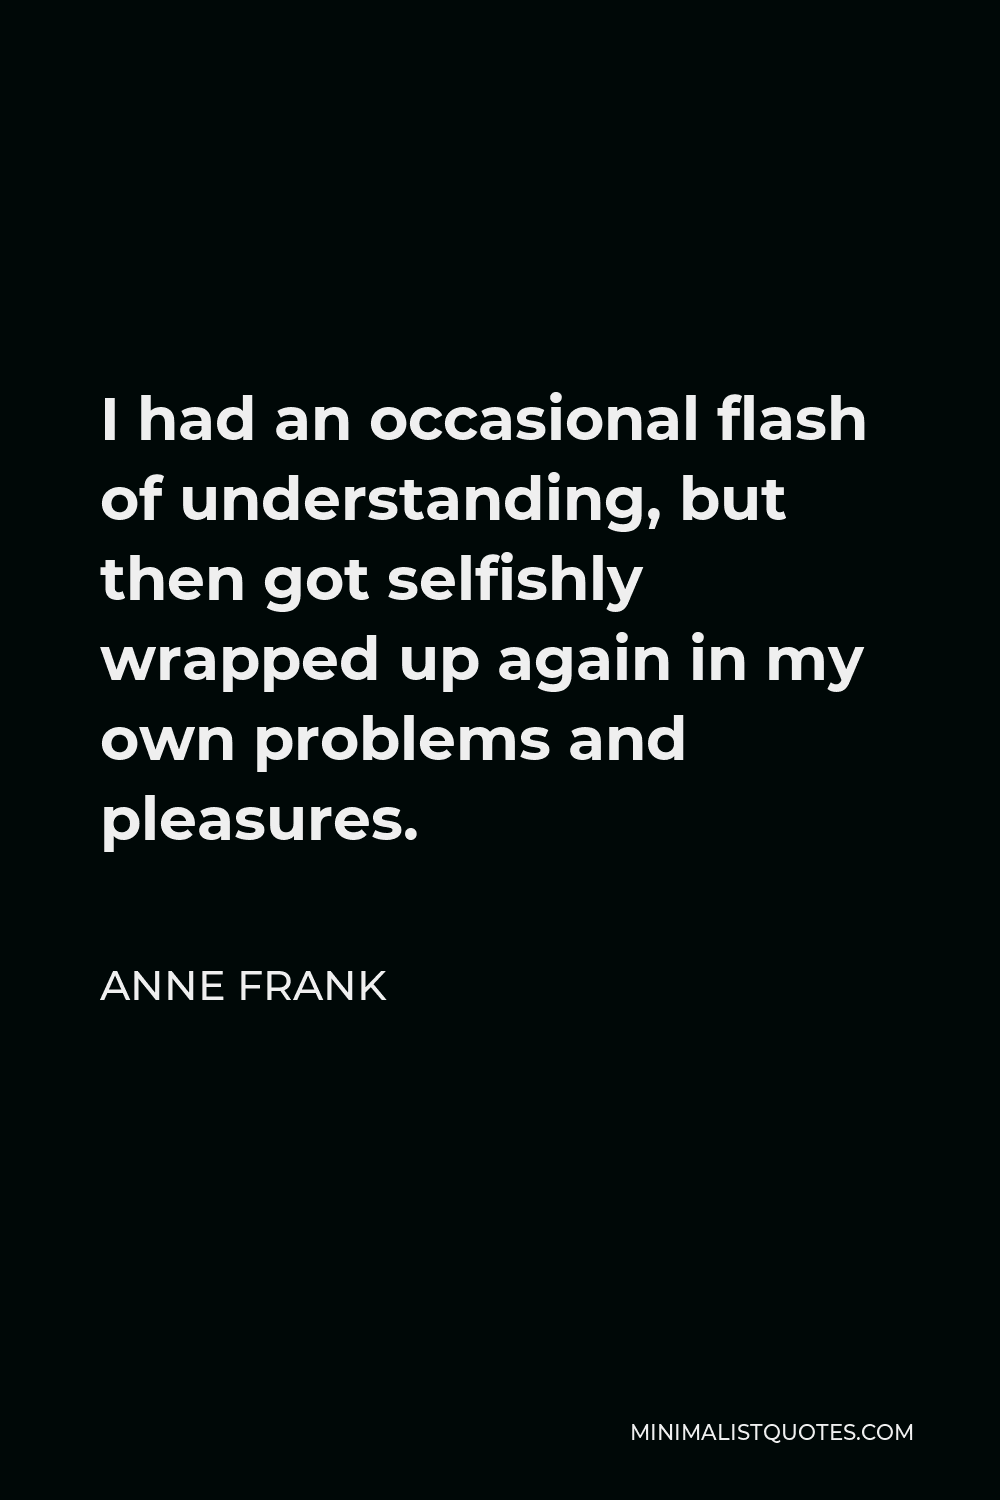 Anne Frank Quote - I had an occasional flash of understanding, but then got selfishly wrapped up again in my own problems and pleasures.